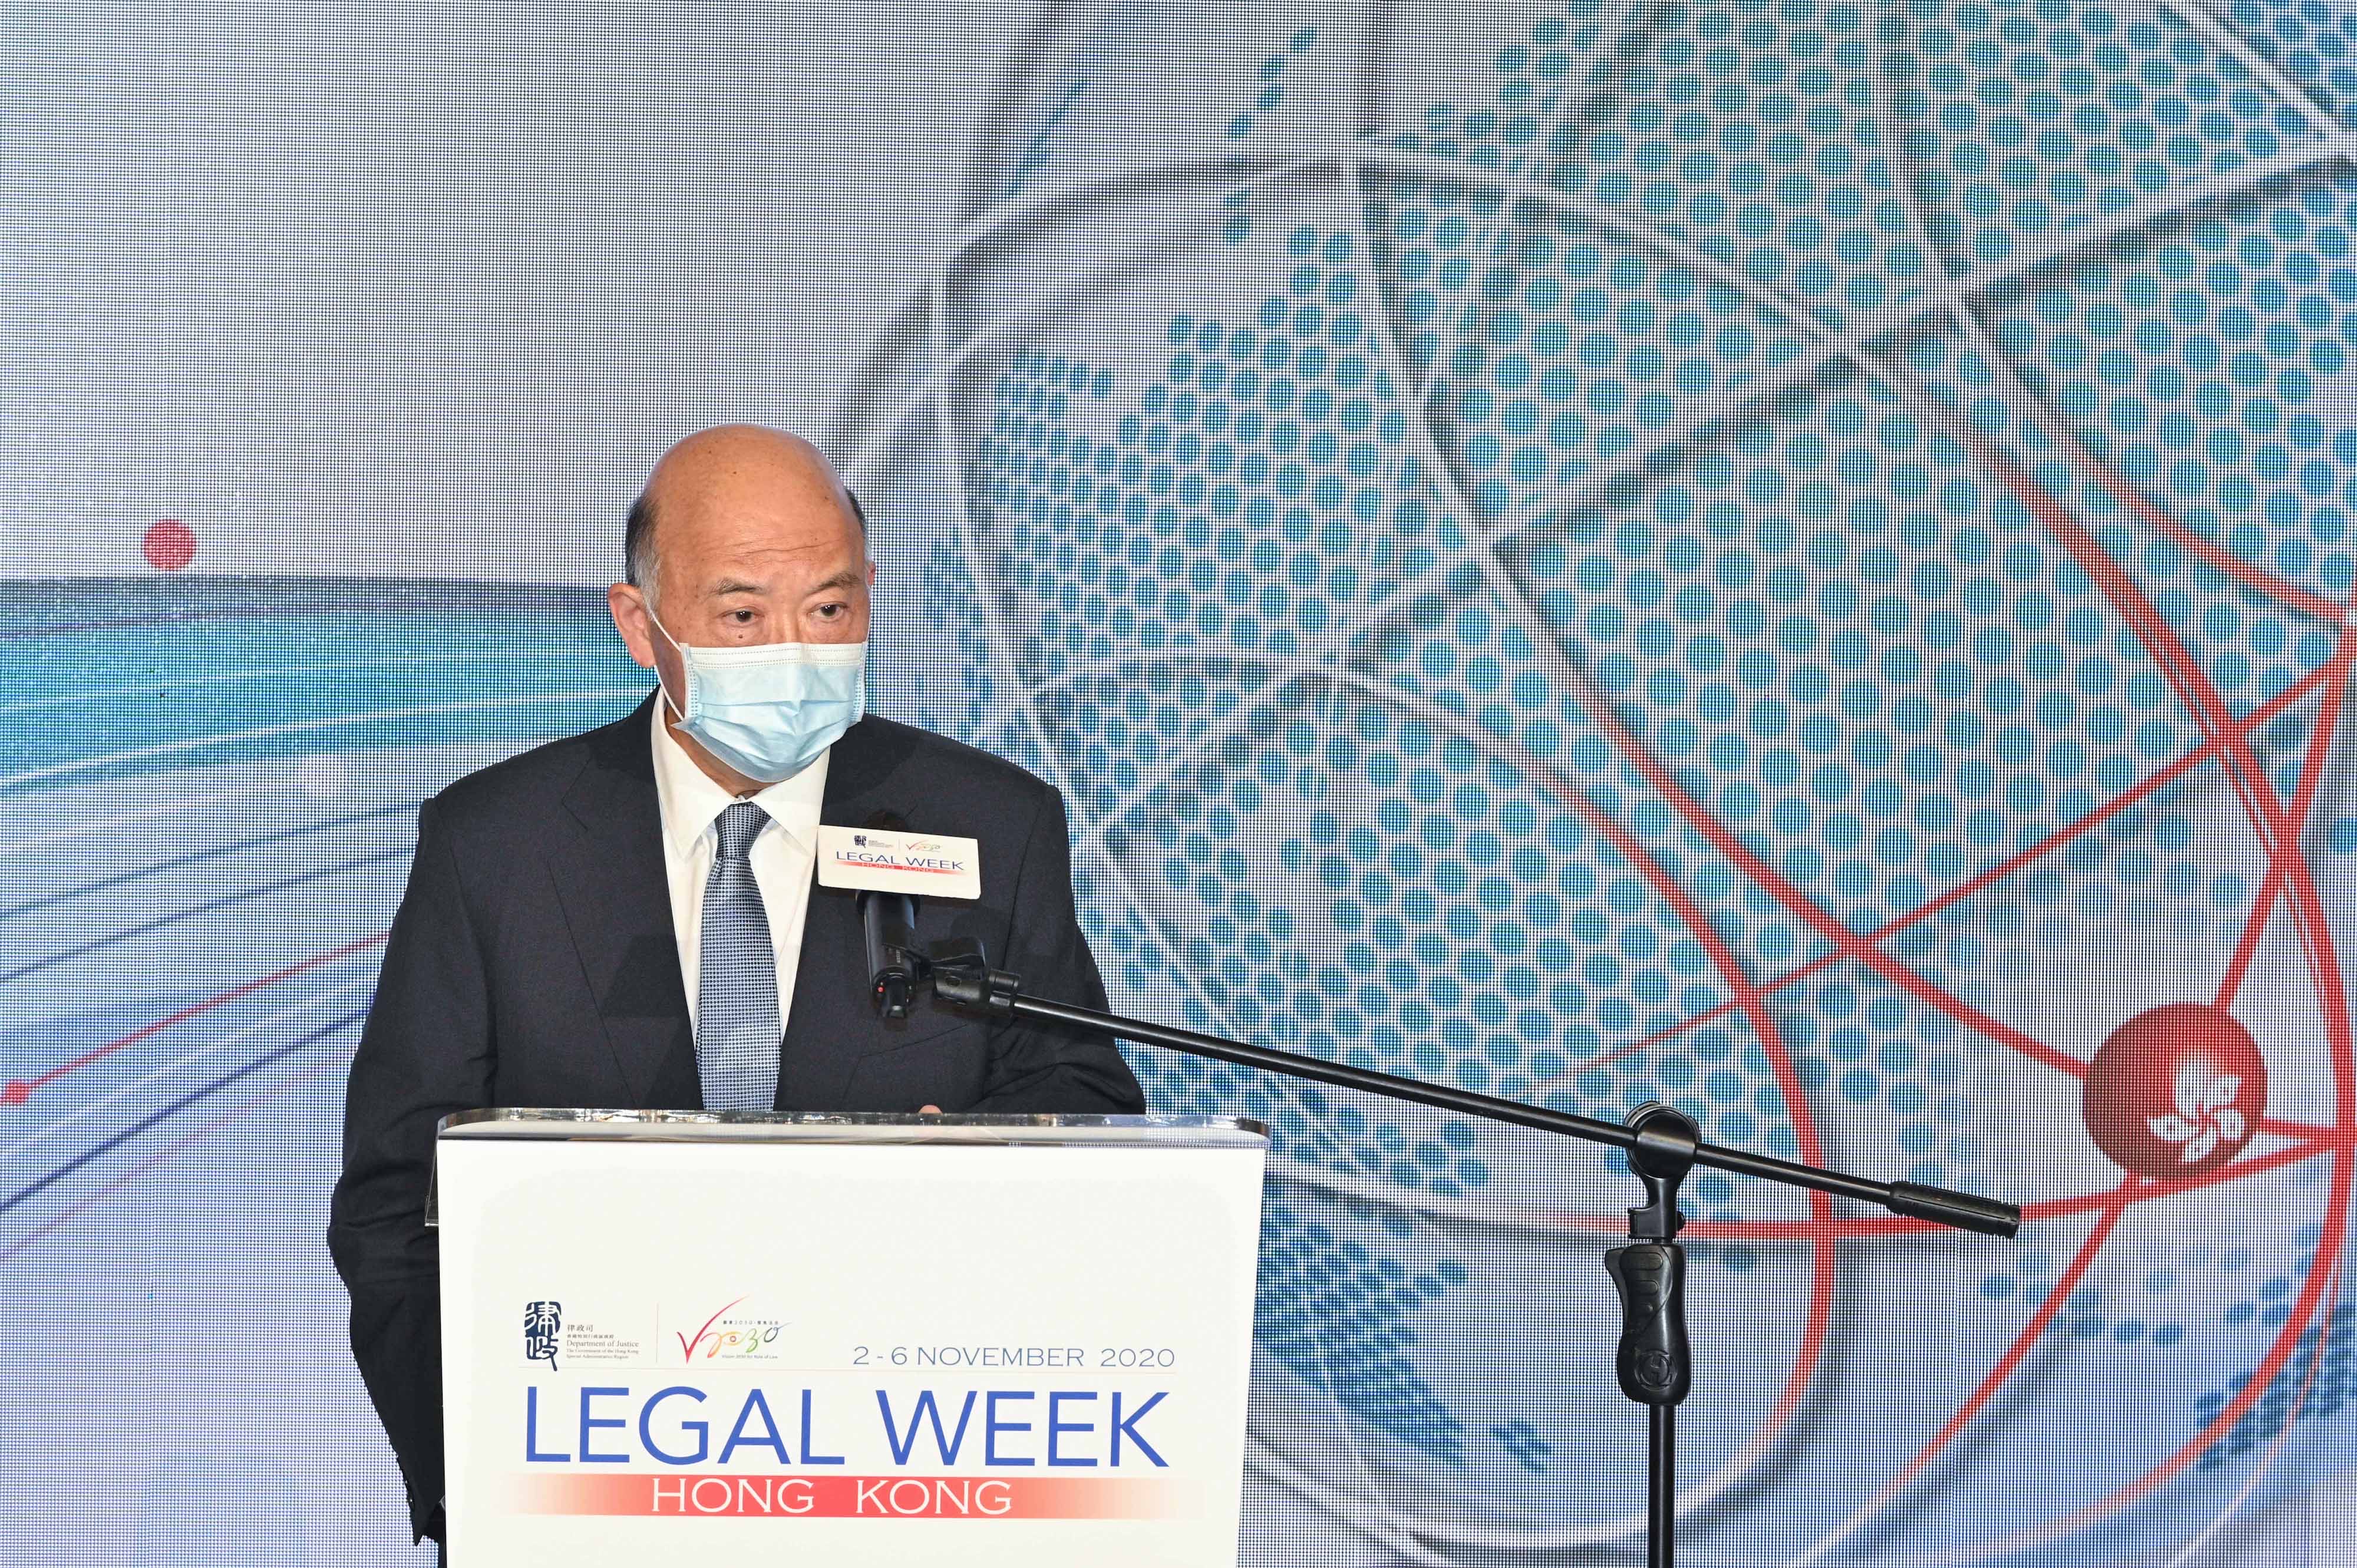 The opening of the Hong Kong Legal Week 2020 was held today (November 2) at the former French Mission Building. Today also marked the opening of the Hong Kong Legal Hub and the official launch of the 'Vision 2030 for Rule of Law'. Photo shows the Chief Justice of the Court of Final Appeal, Mr Geoffrey Ma Tao-li, speaking at the opening ceremony.